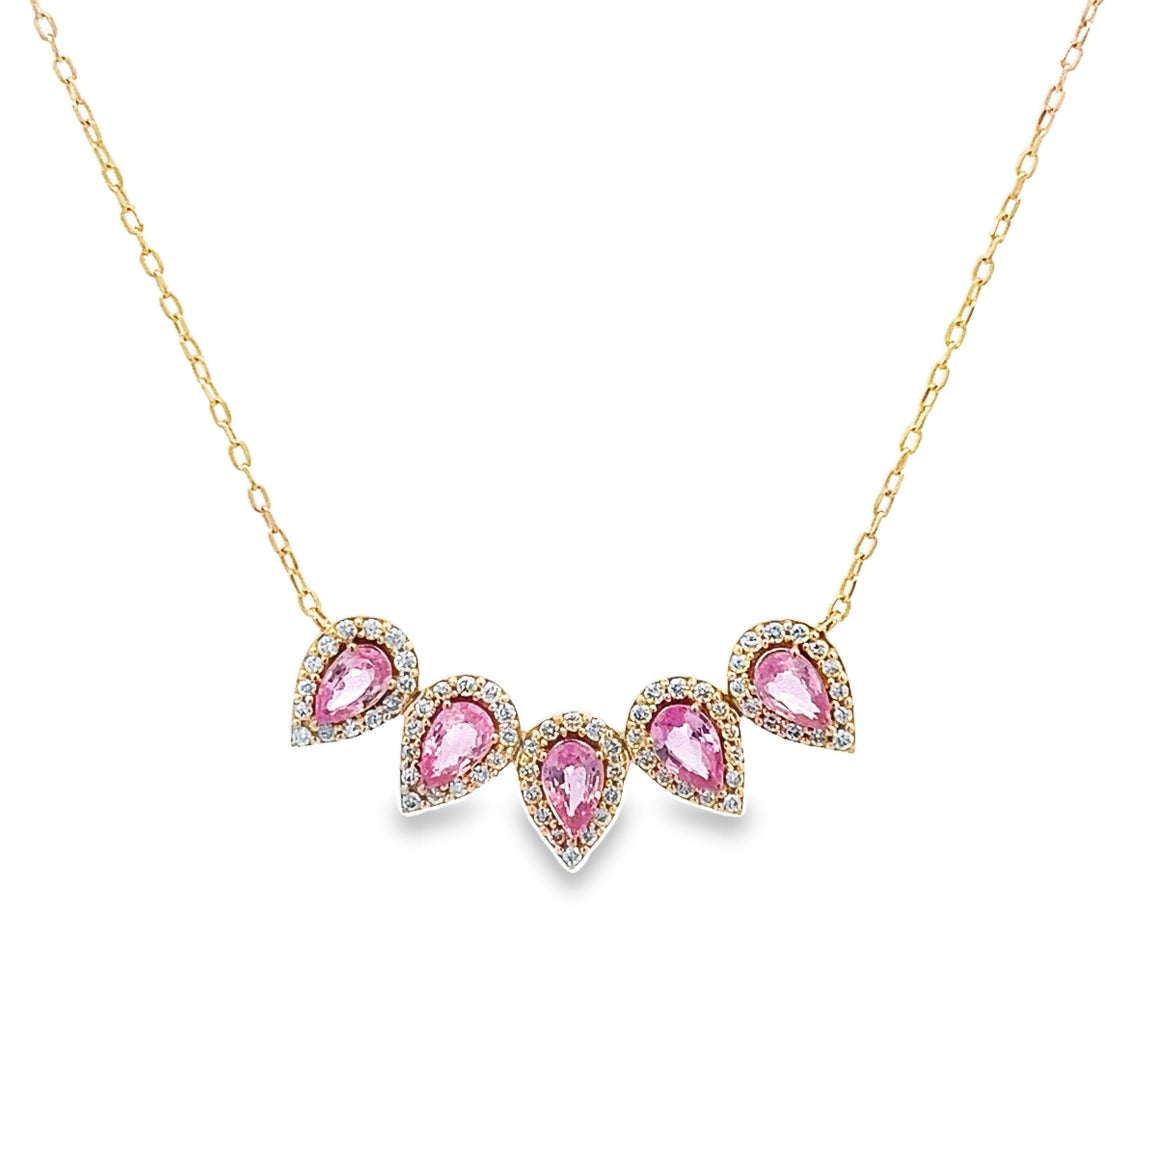 18K GOLD  PINK SAPPHIRE CUT PEAR WITH DIAMOND HALO NECKLACE